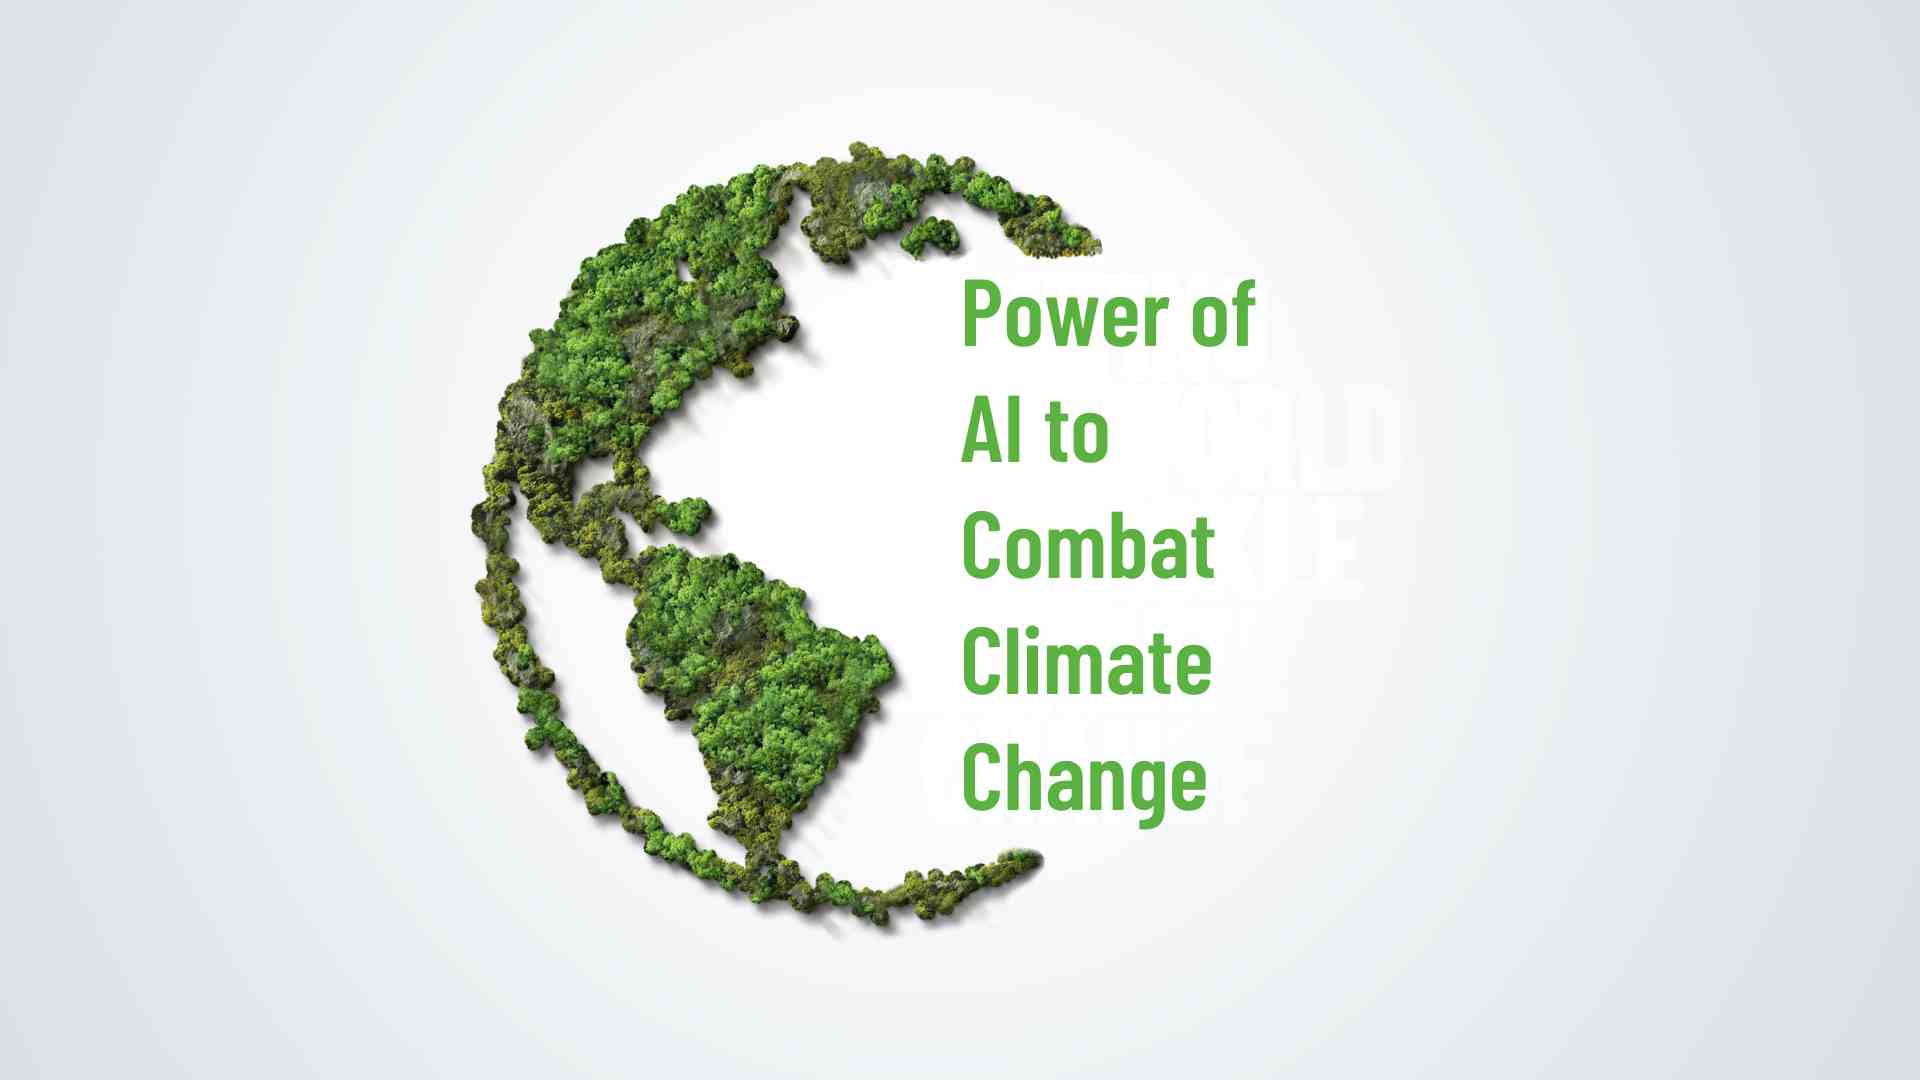 Power of AI to Combat Climate Change